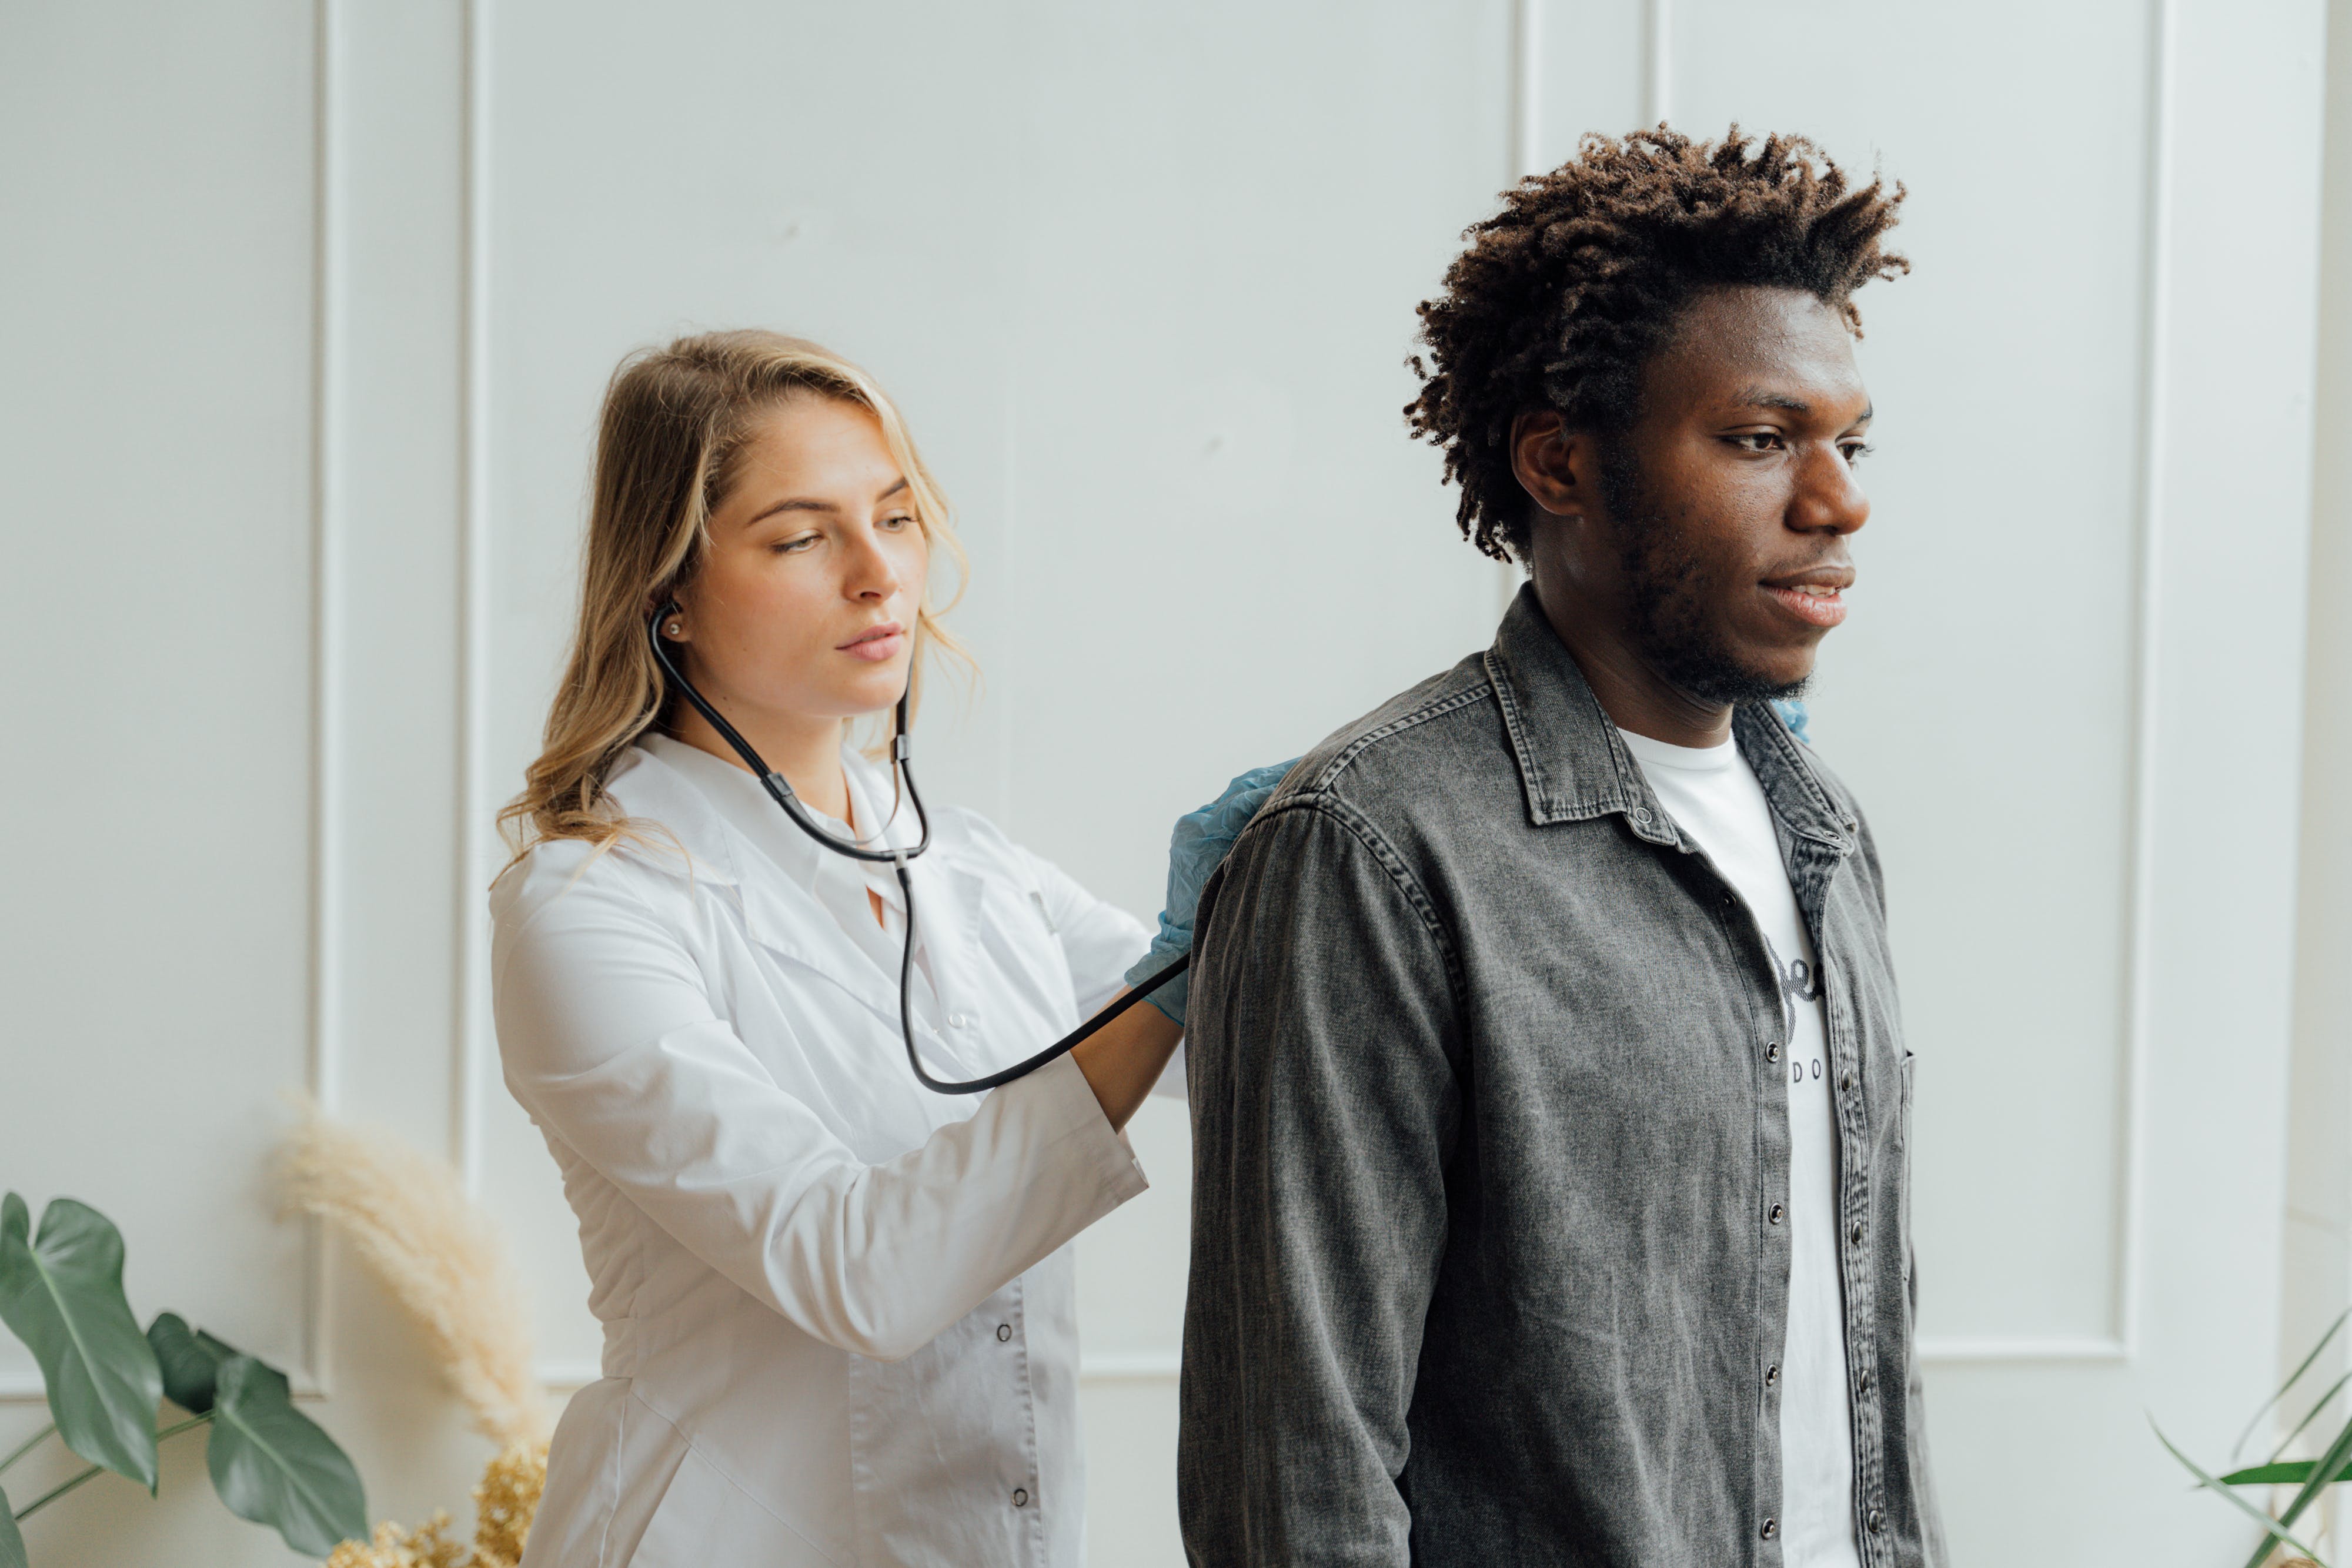 A female doctor checking a man's back. | Source: Pexels